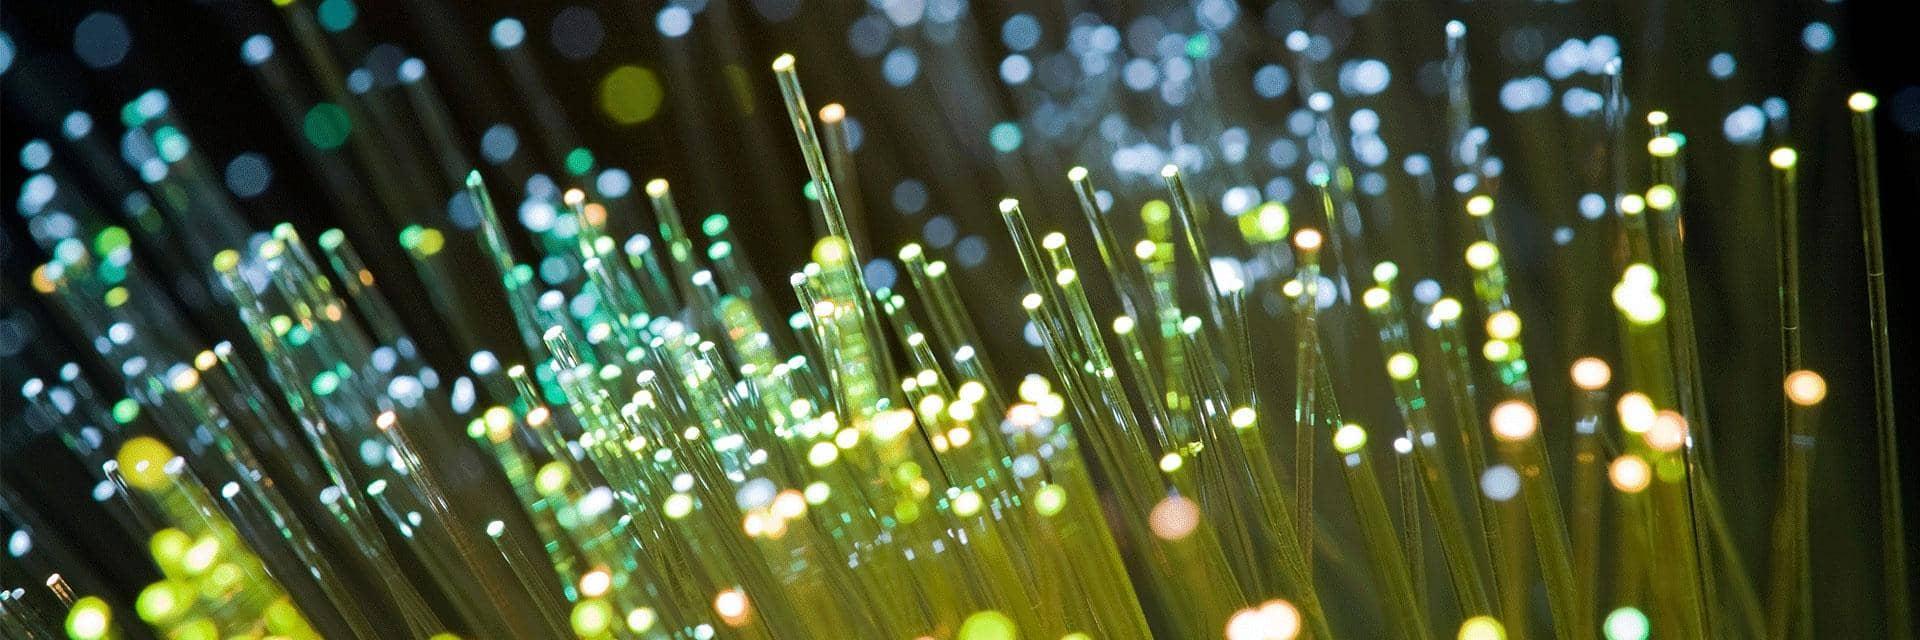 Optical fibre cables. Having a proper strategy will help protect your company from data breaches.